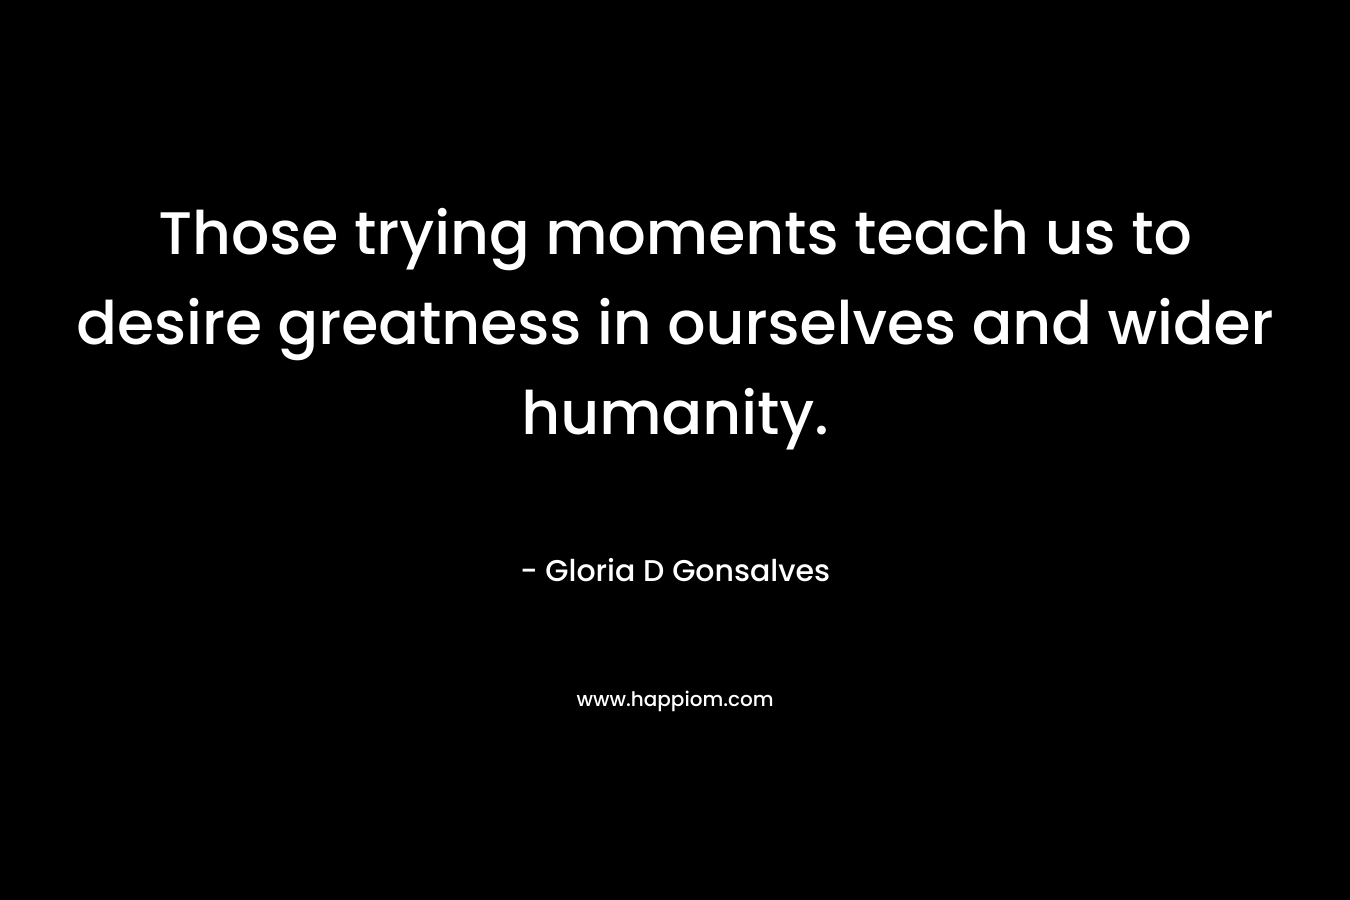 Those trying moments teach us to desire greatness in ourselves and wider humanity.